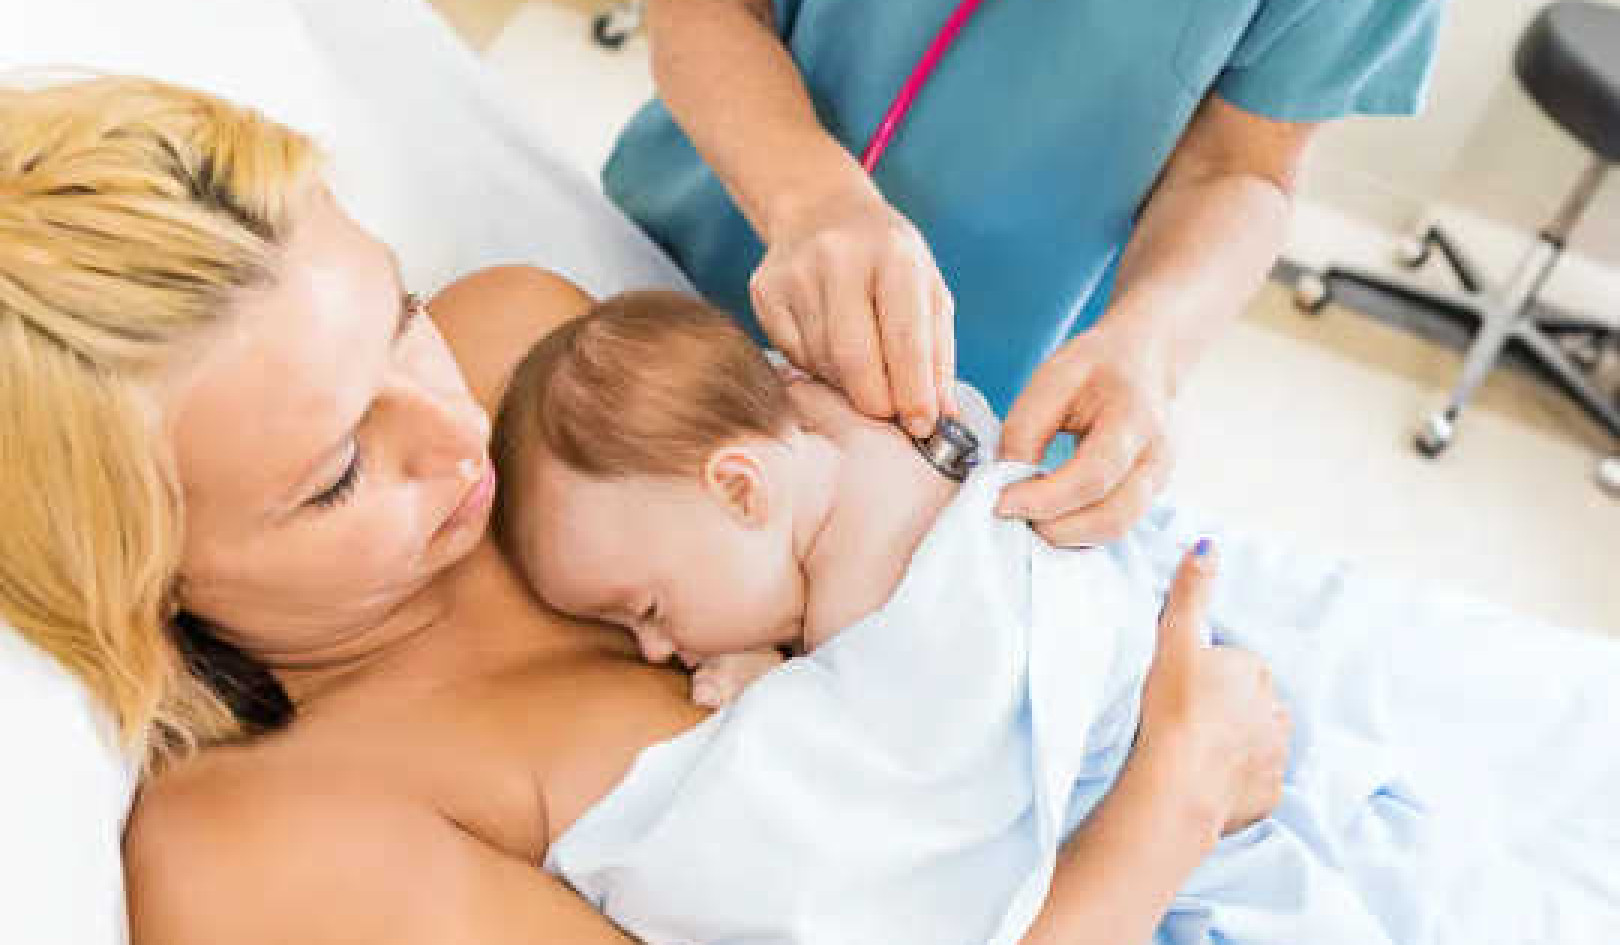 The Power of Parents: 3 Ways You Can Reduce Your Baby’s Pain During Medical Procedures